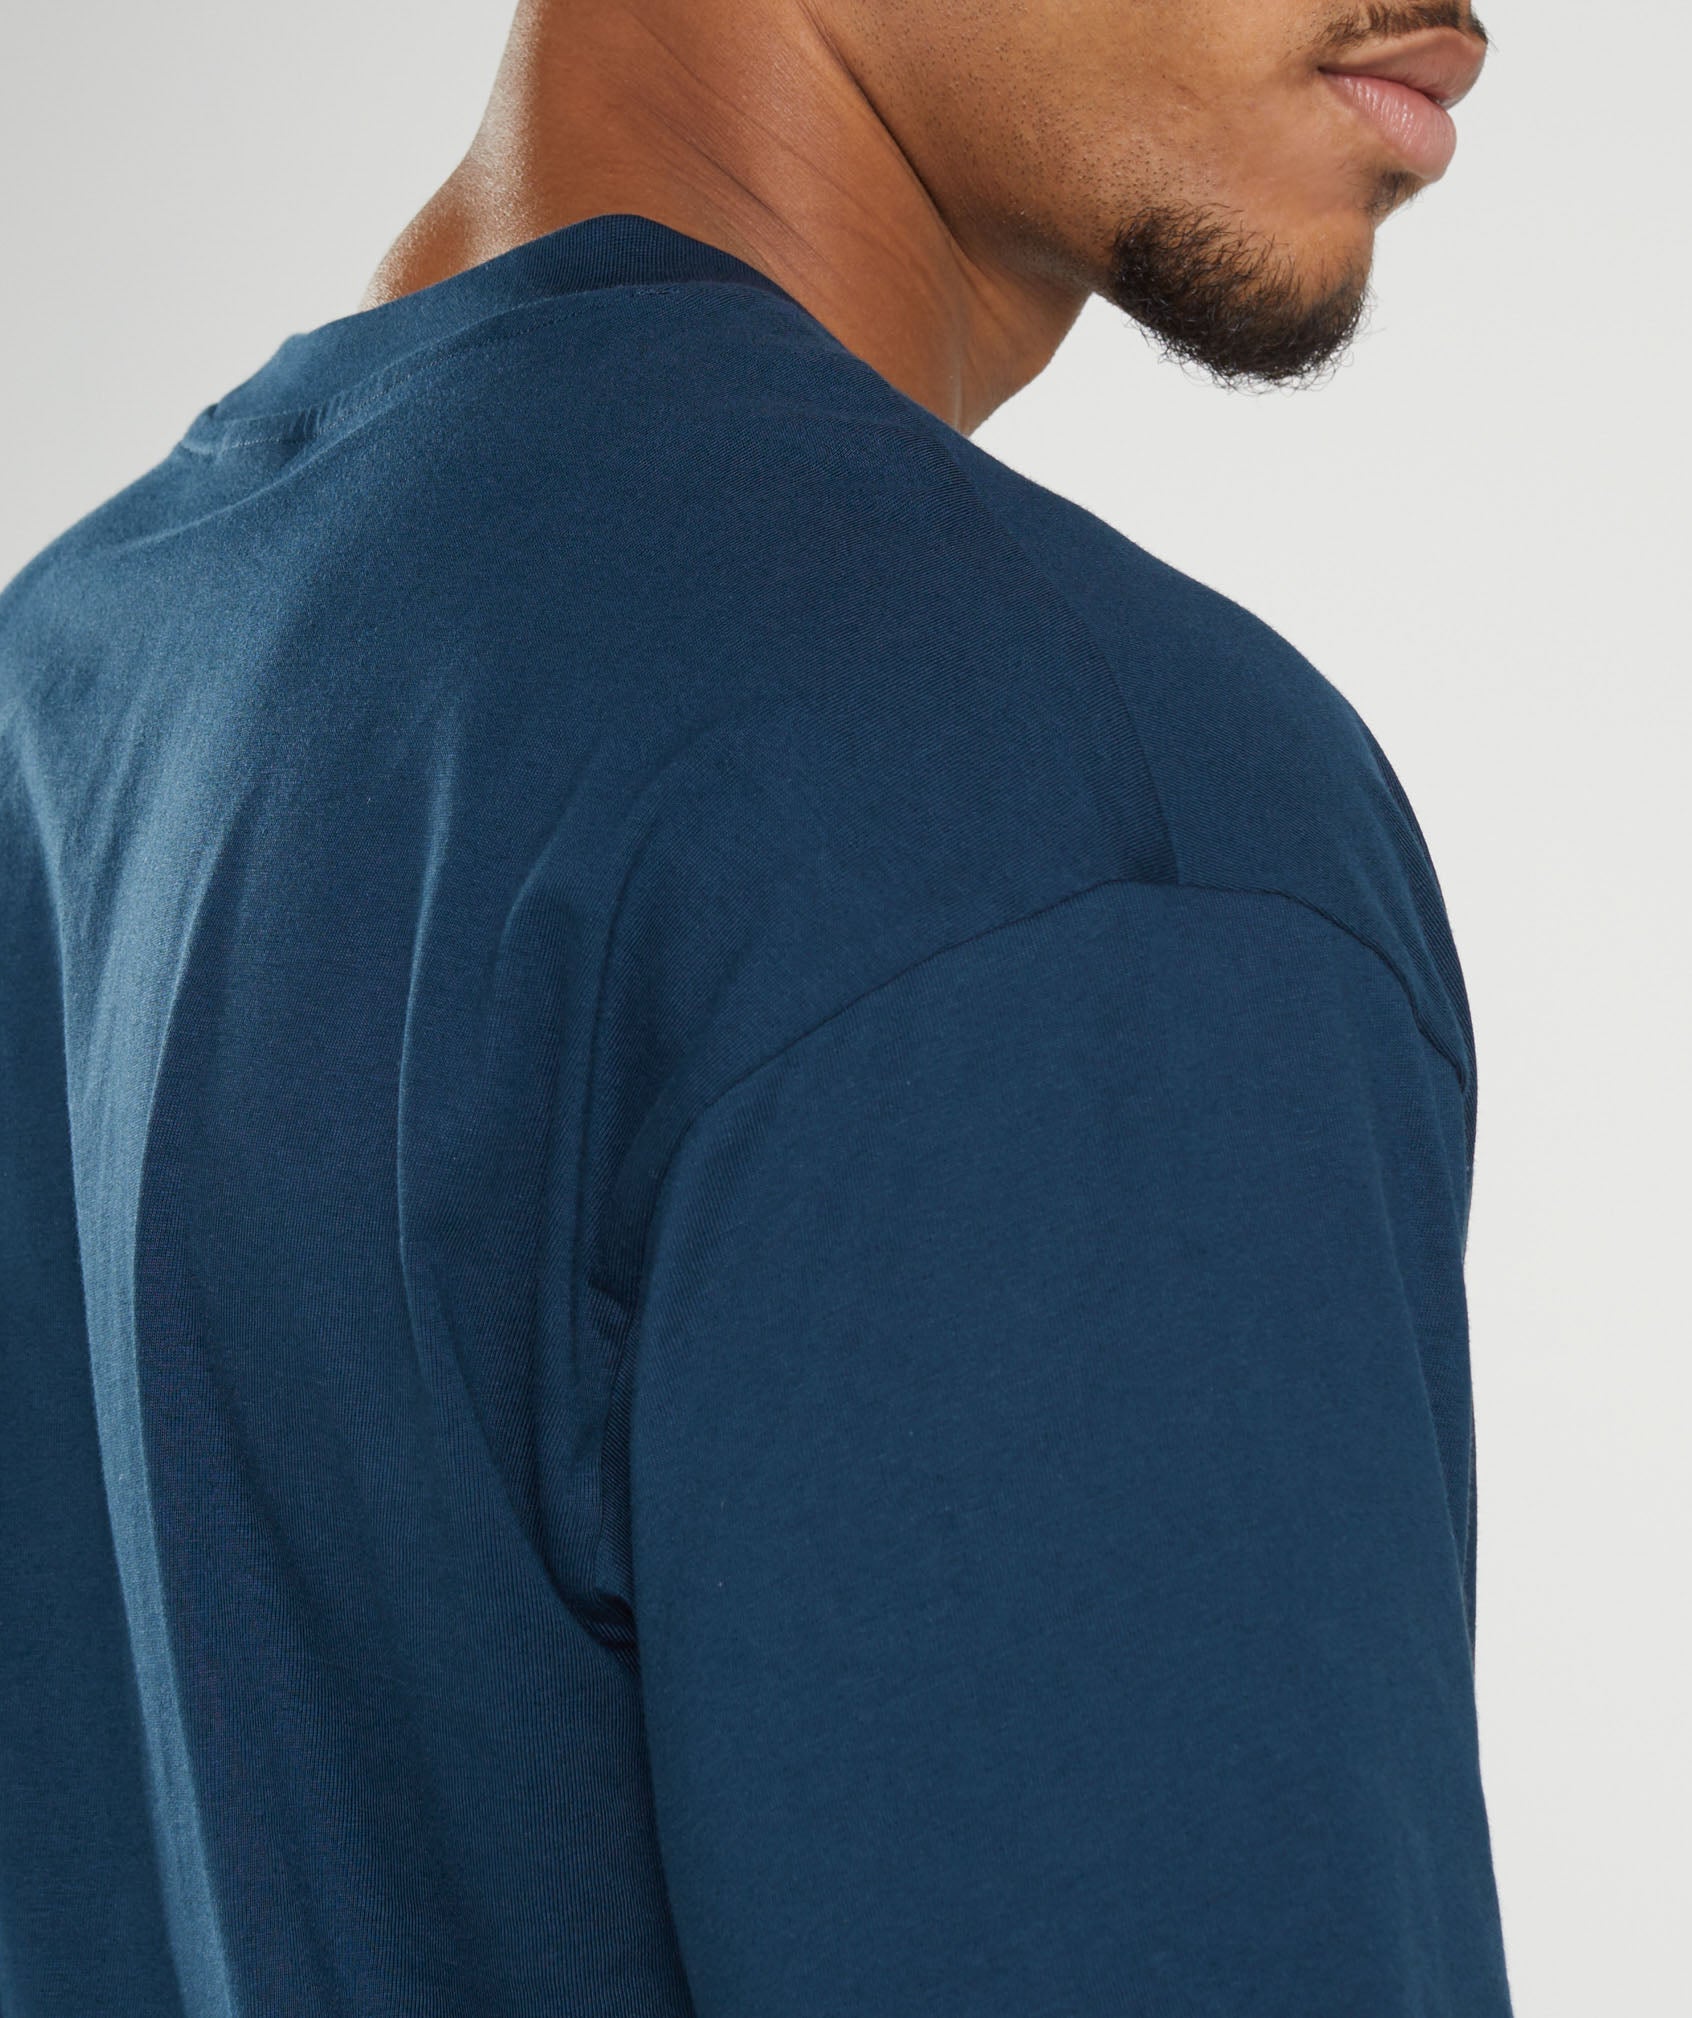 Rest Day Sweats T-Shirt in Navy - view 7